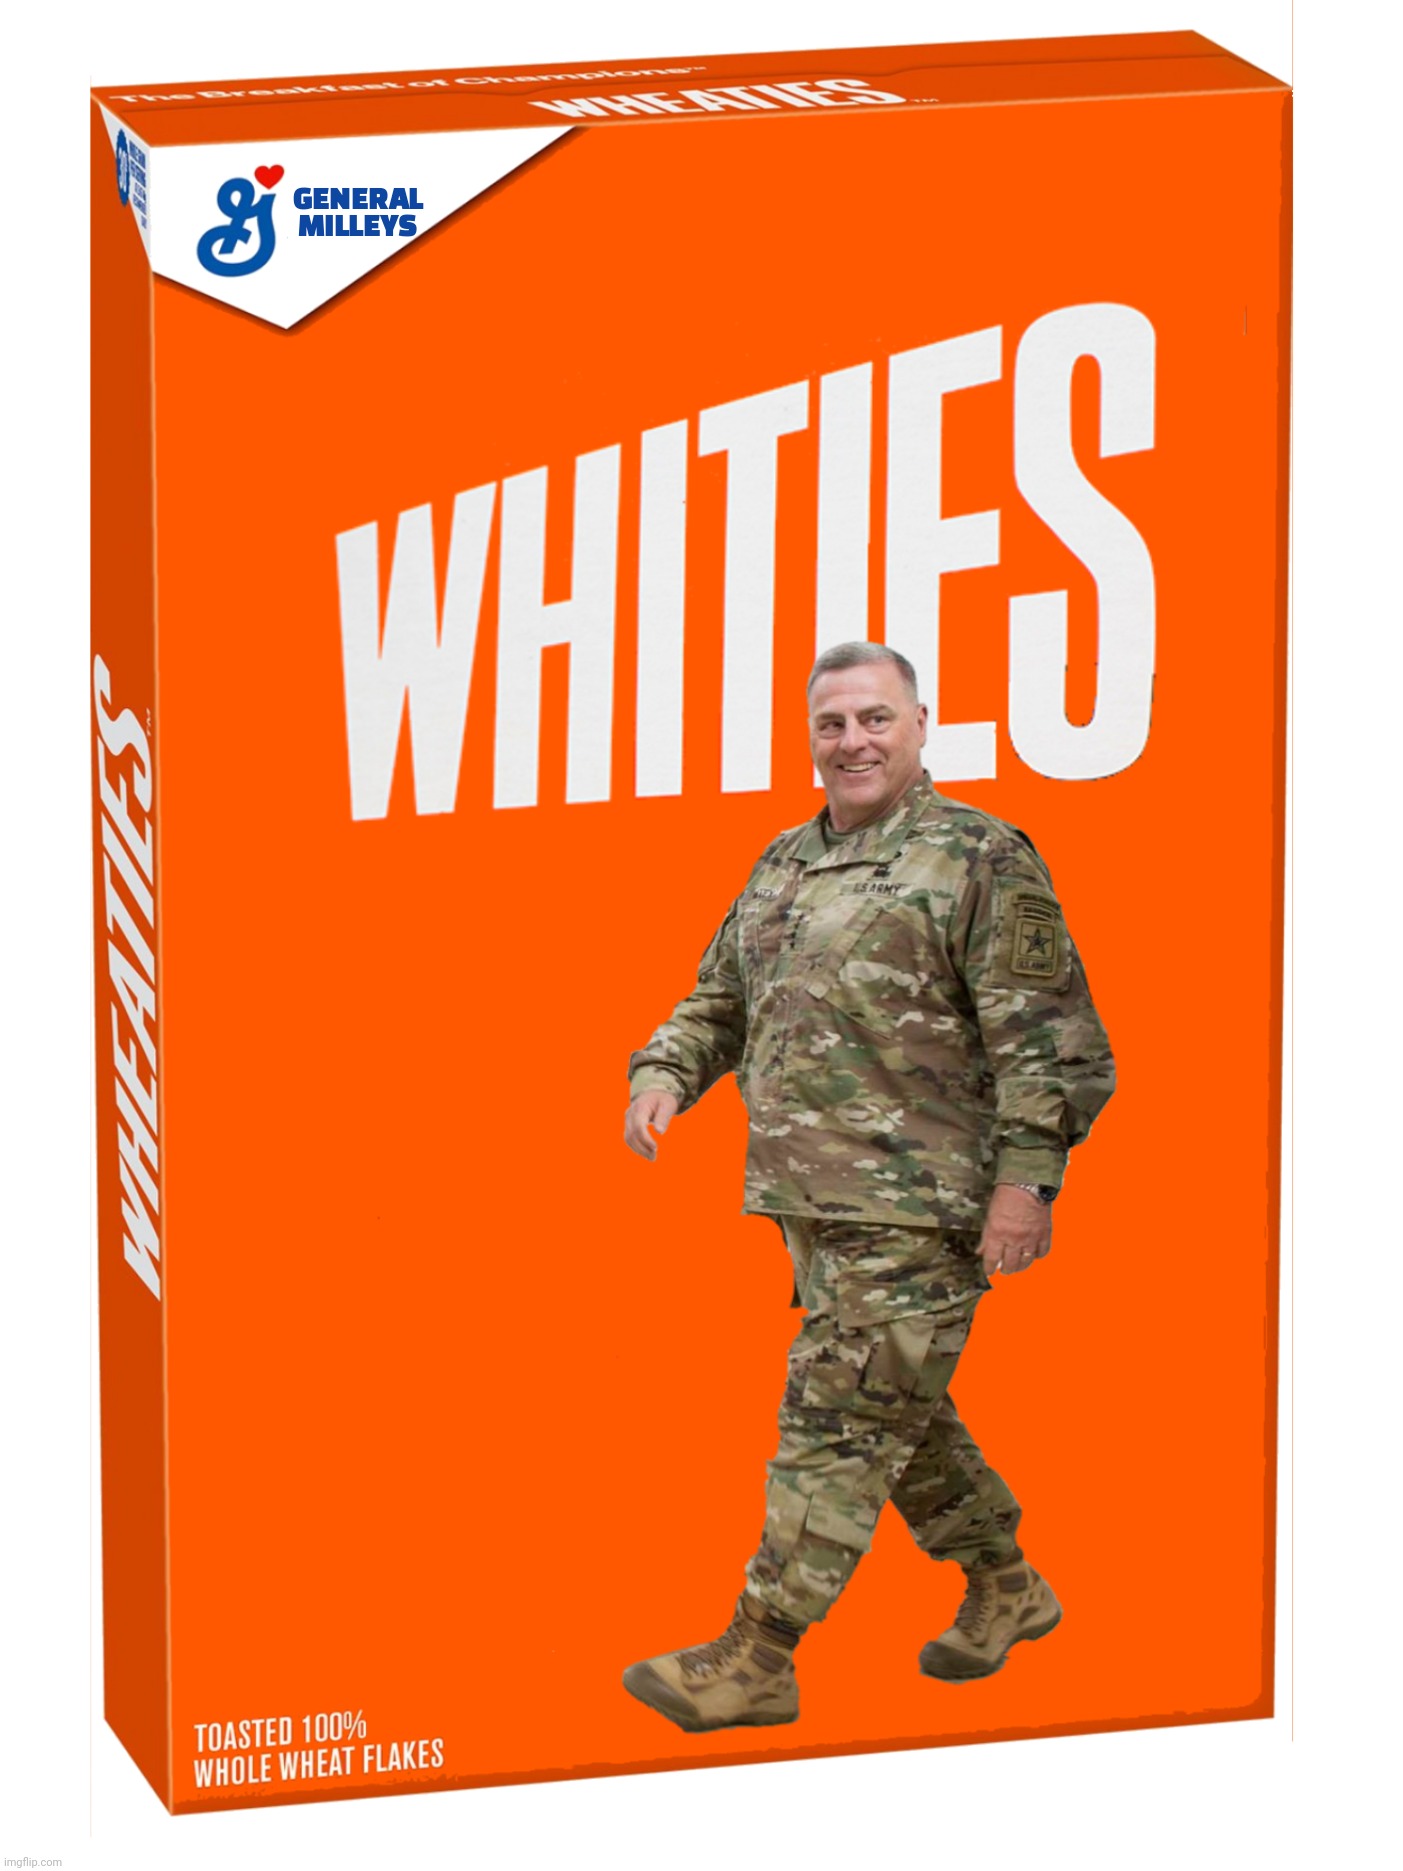 Bad Photoshop Sunday presents:  The Breakfast Of Chumpions | image tagged in bad photoshop sunday,mark milley,wheaties,whities,white rage,general milleys | made w/ Imgflip meme maker